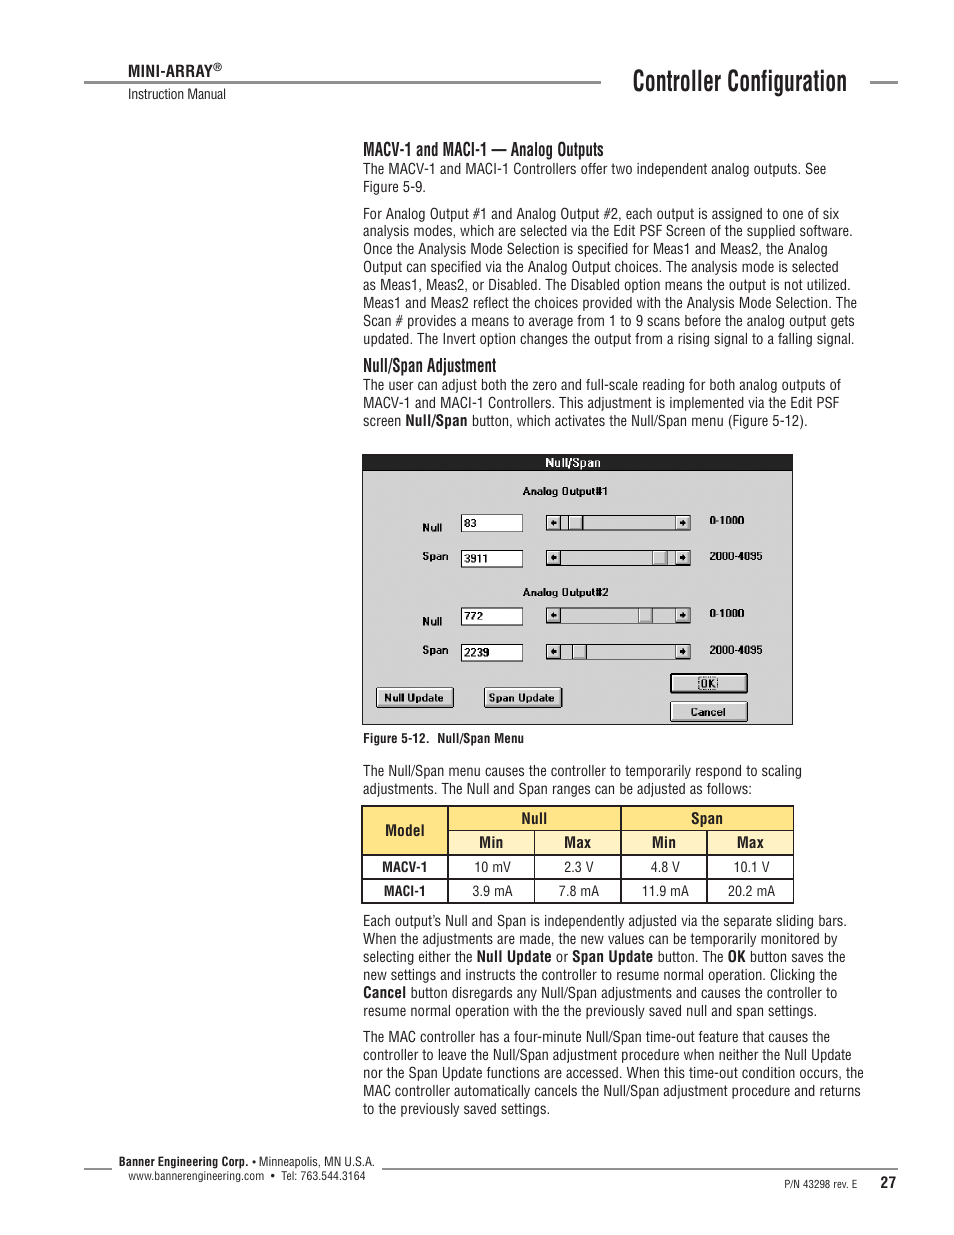 Controller configuration, Macv-1 and maci-1 — analog outputs, Null/span  adjustment | Banner A-GAGE MINI-ARRAY Series User Manual | Page 27 / 44 |  Original mode